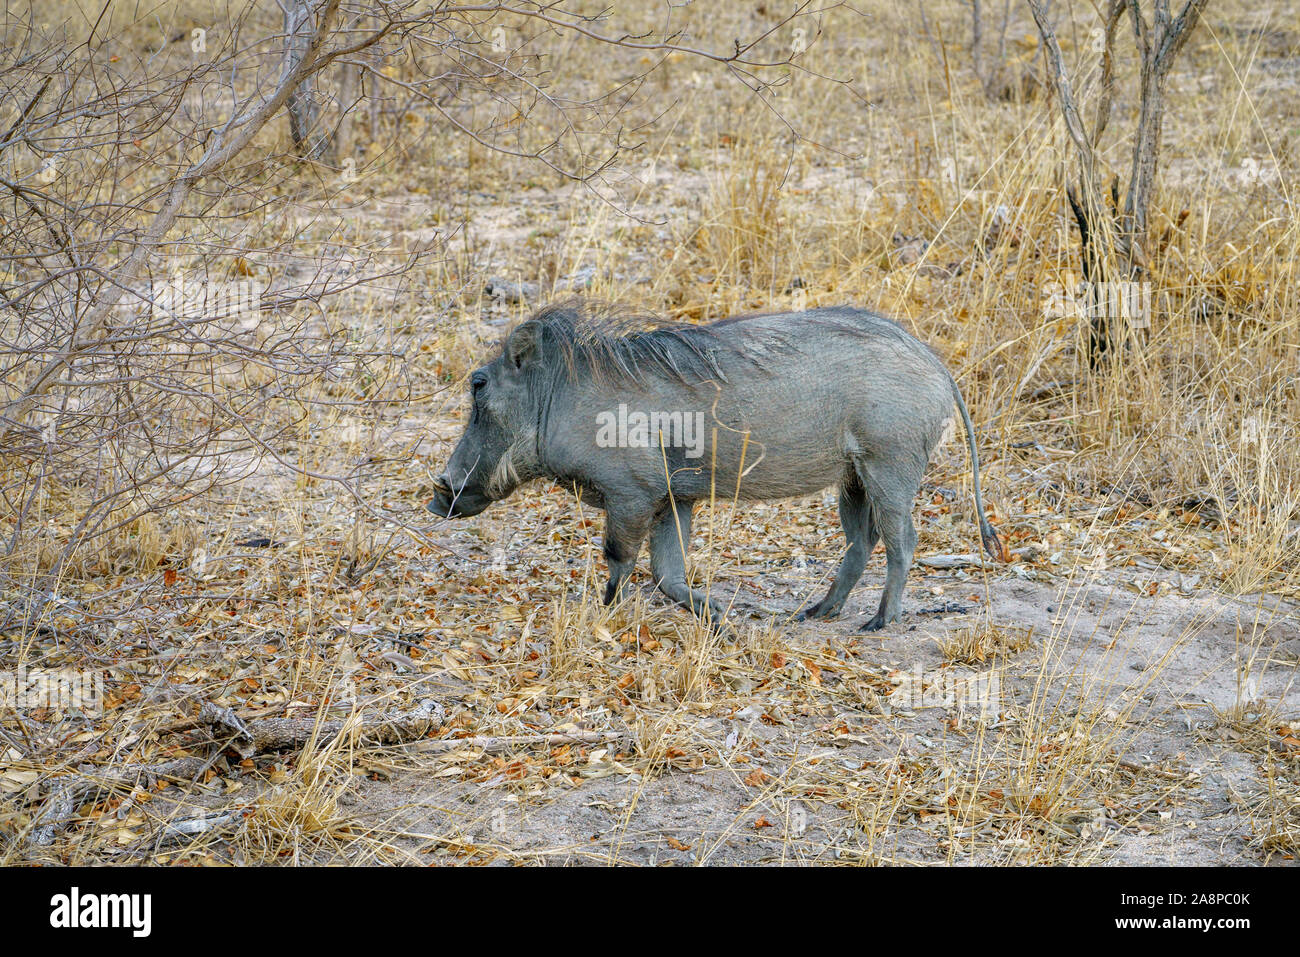 wild warthogs in kruger national park in mpumalanga in south africa Stock Photo